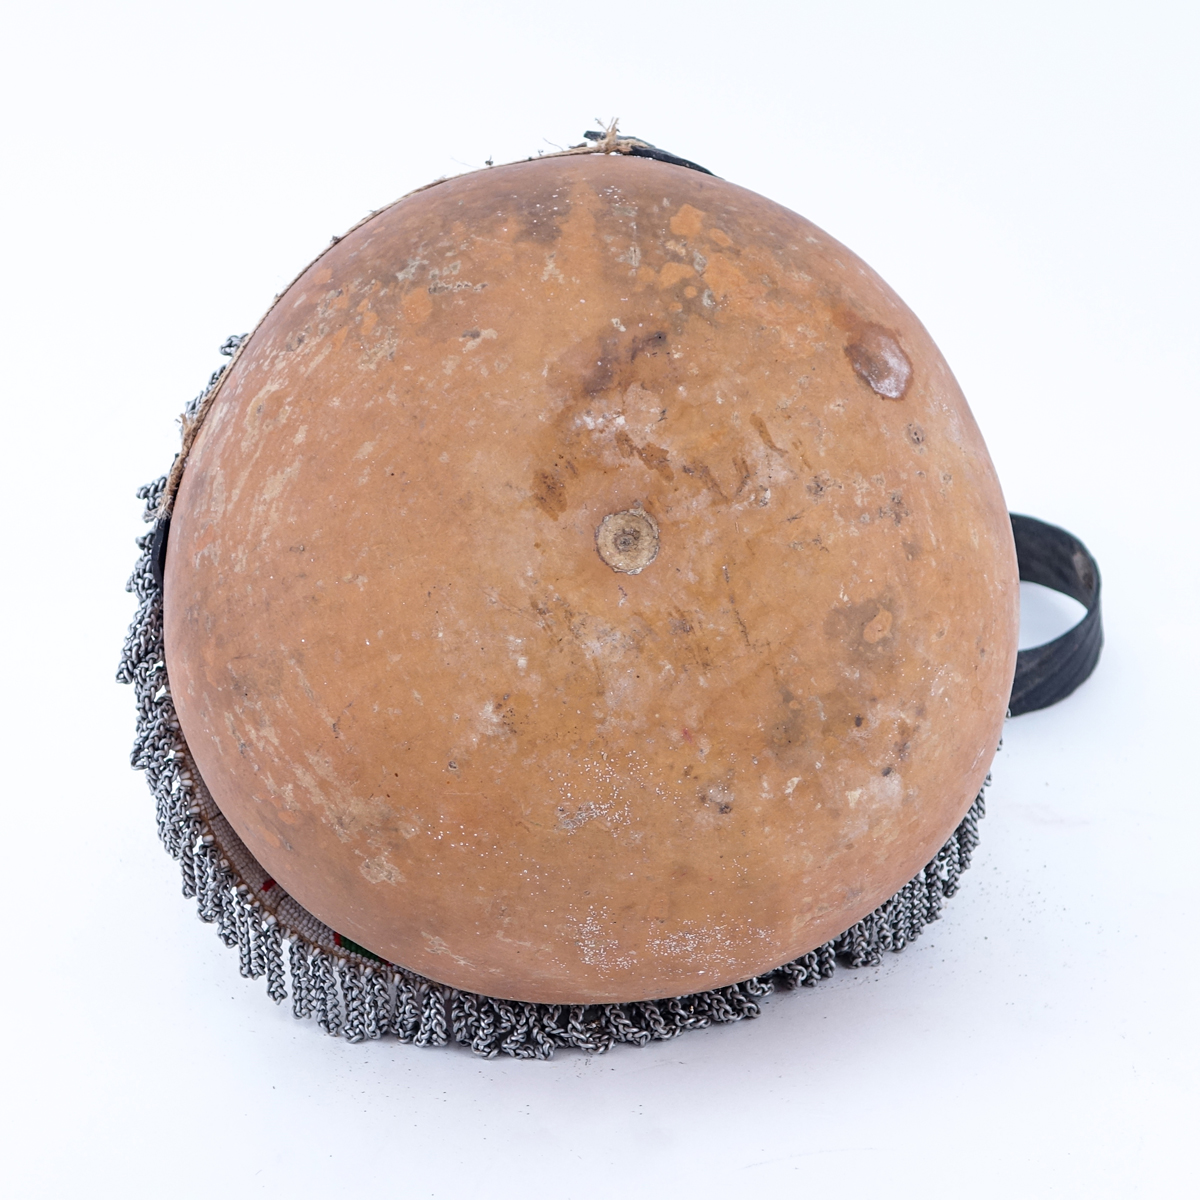 Antique African Beaded Gourd Calabash with Leather Handle, Possibly from the Zulu Tribe. Typical fraying overall good condition.